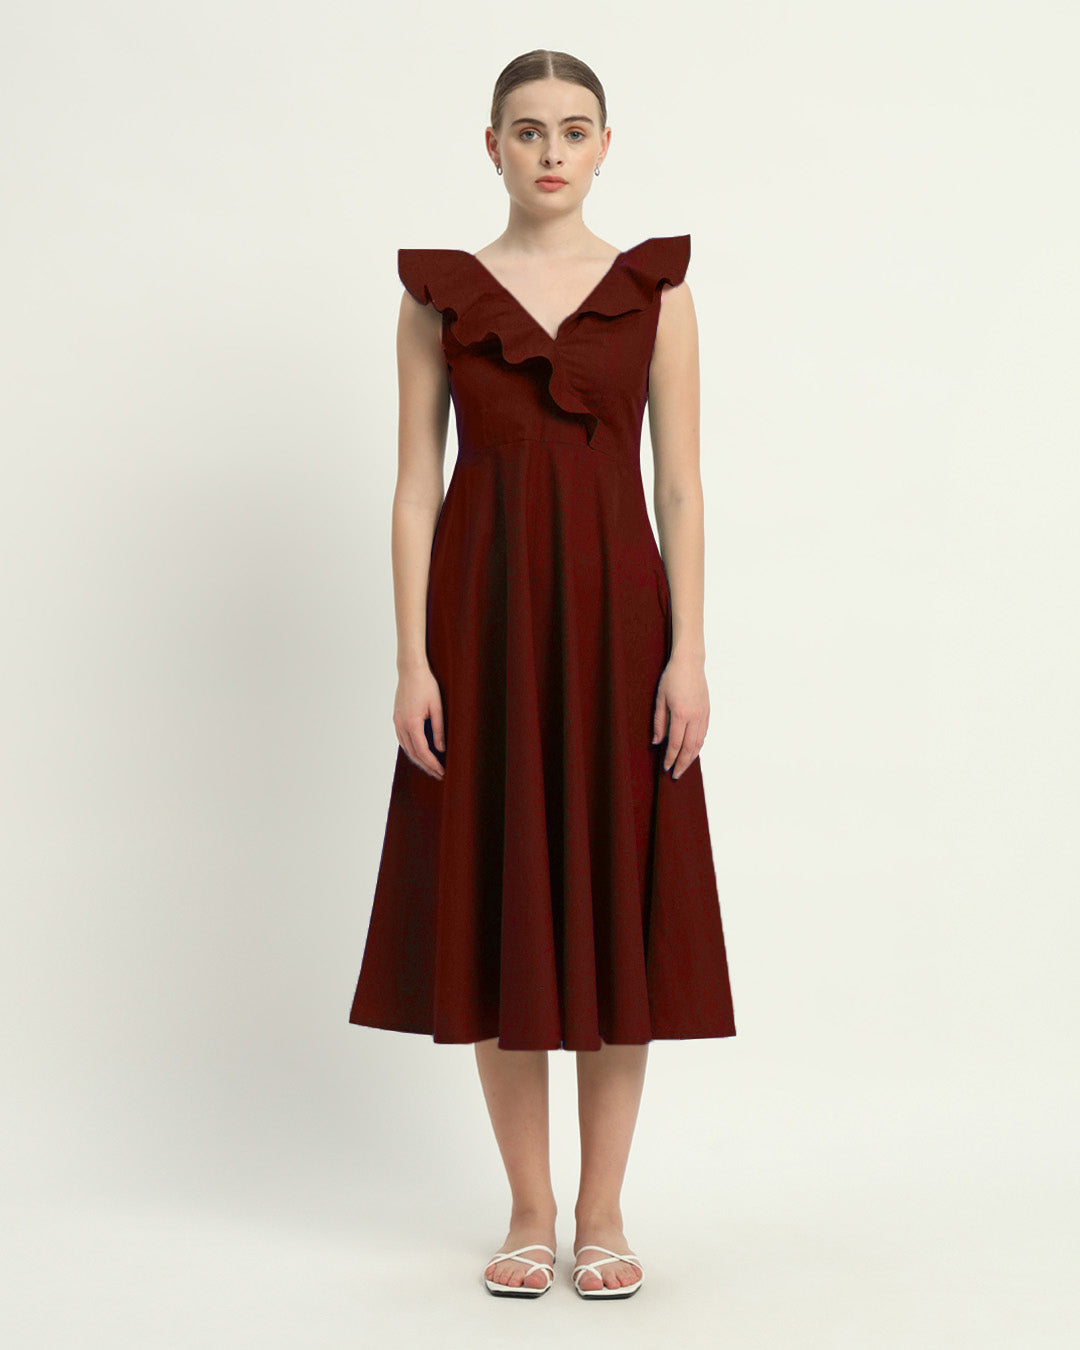 The Rouge Albany Cotton Dress